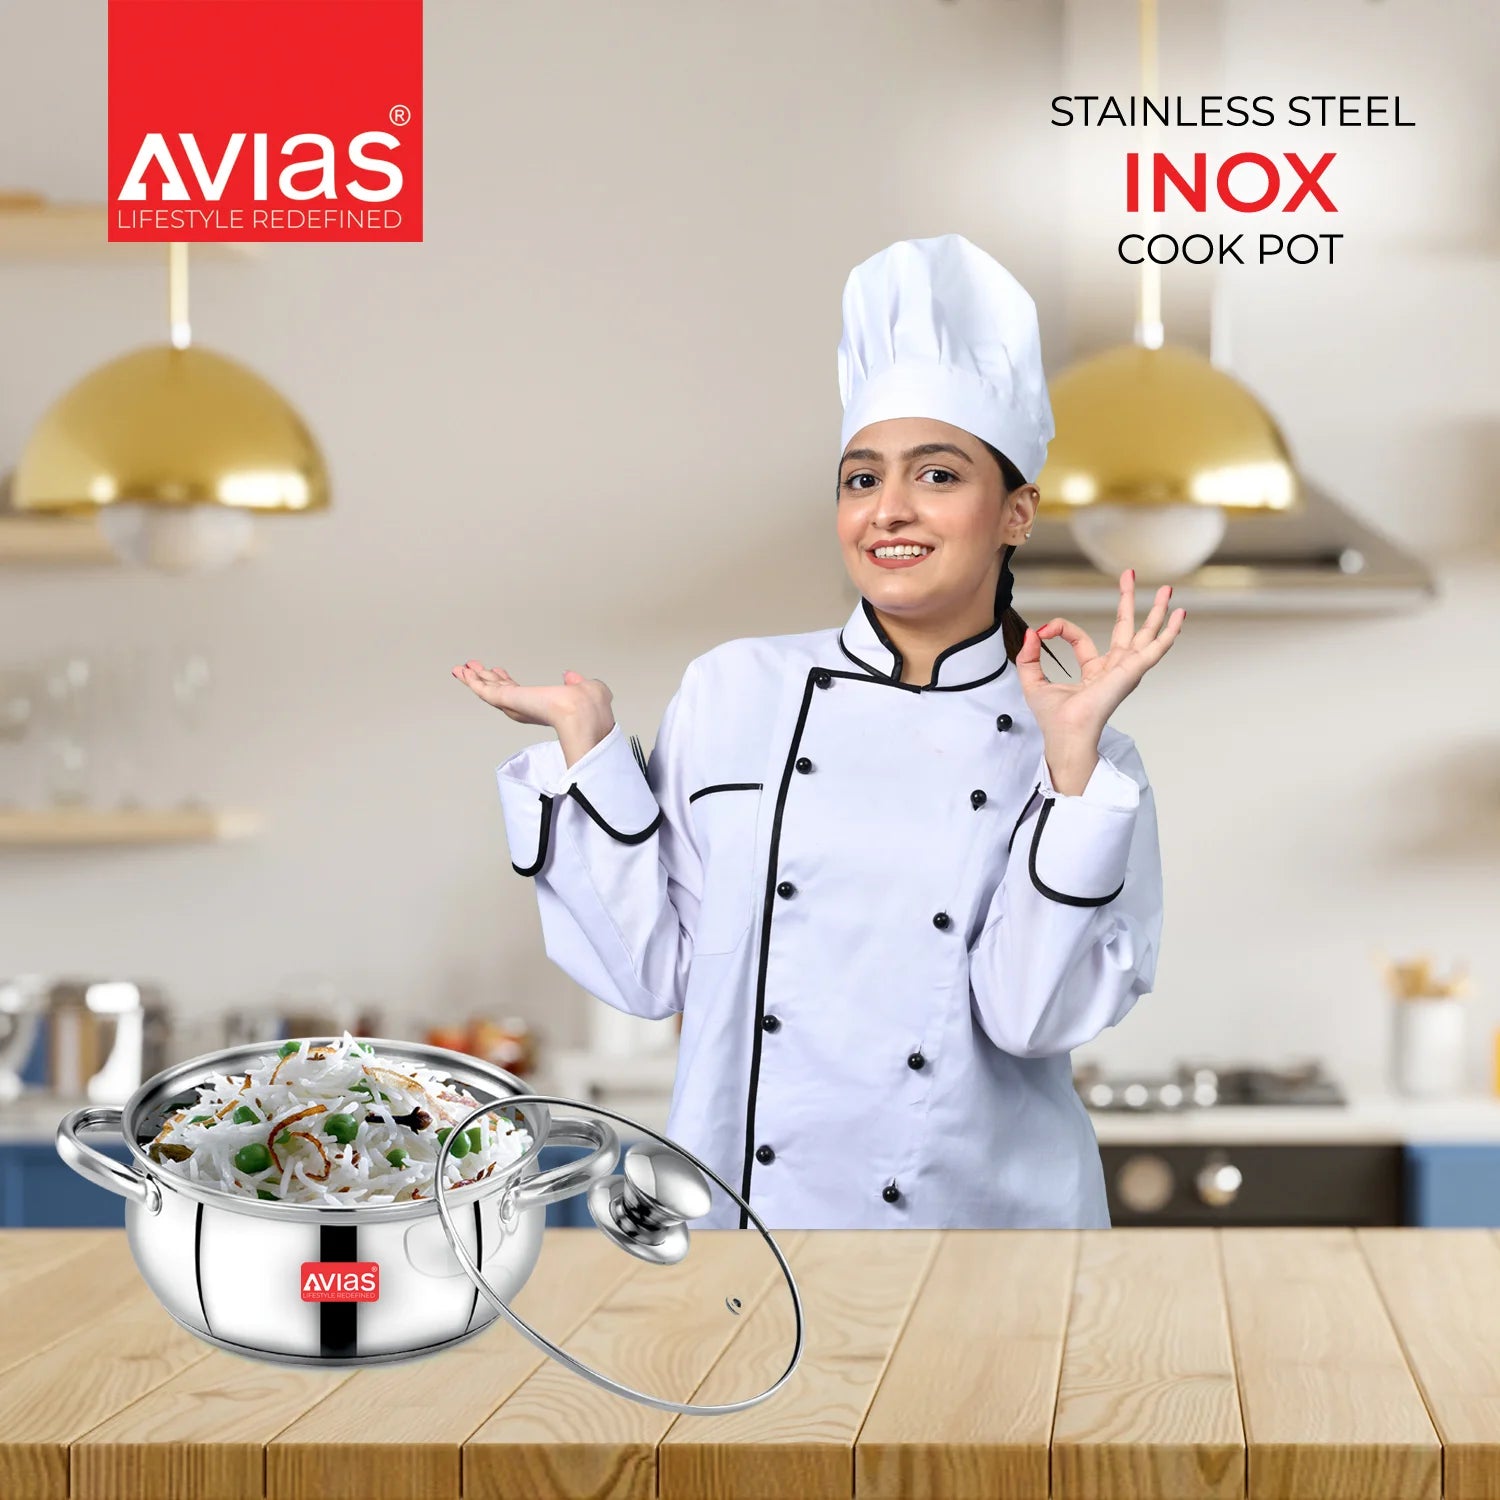 AVIAS Inox IB stainless steel cookpot for cooking quality food in the kitchen